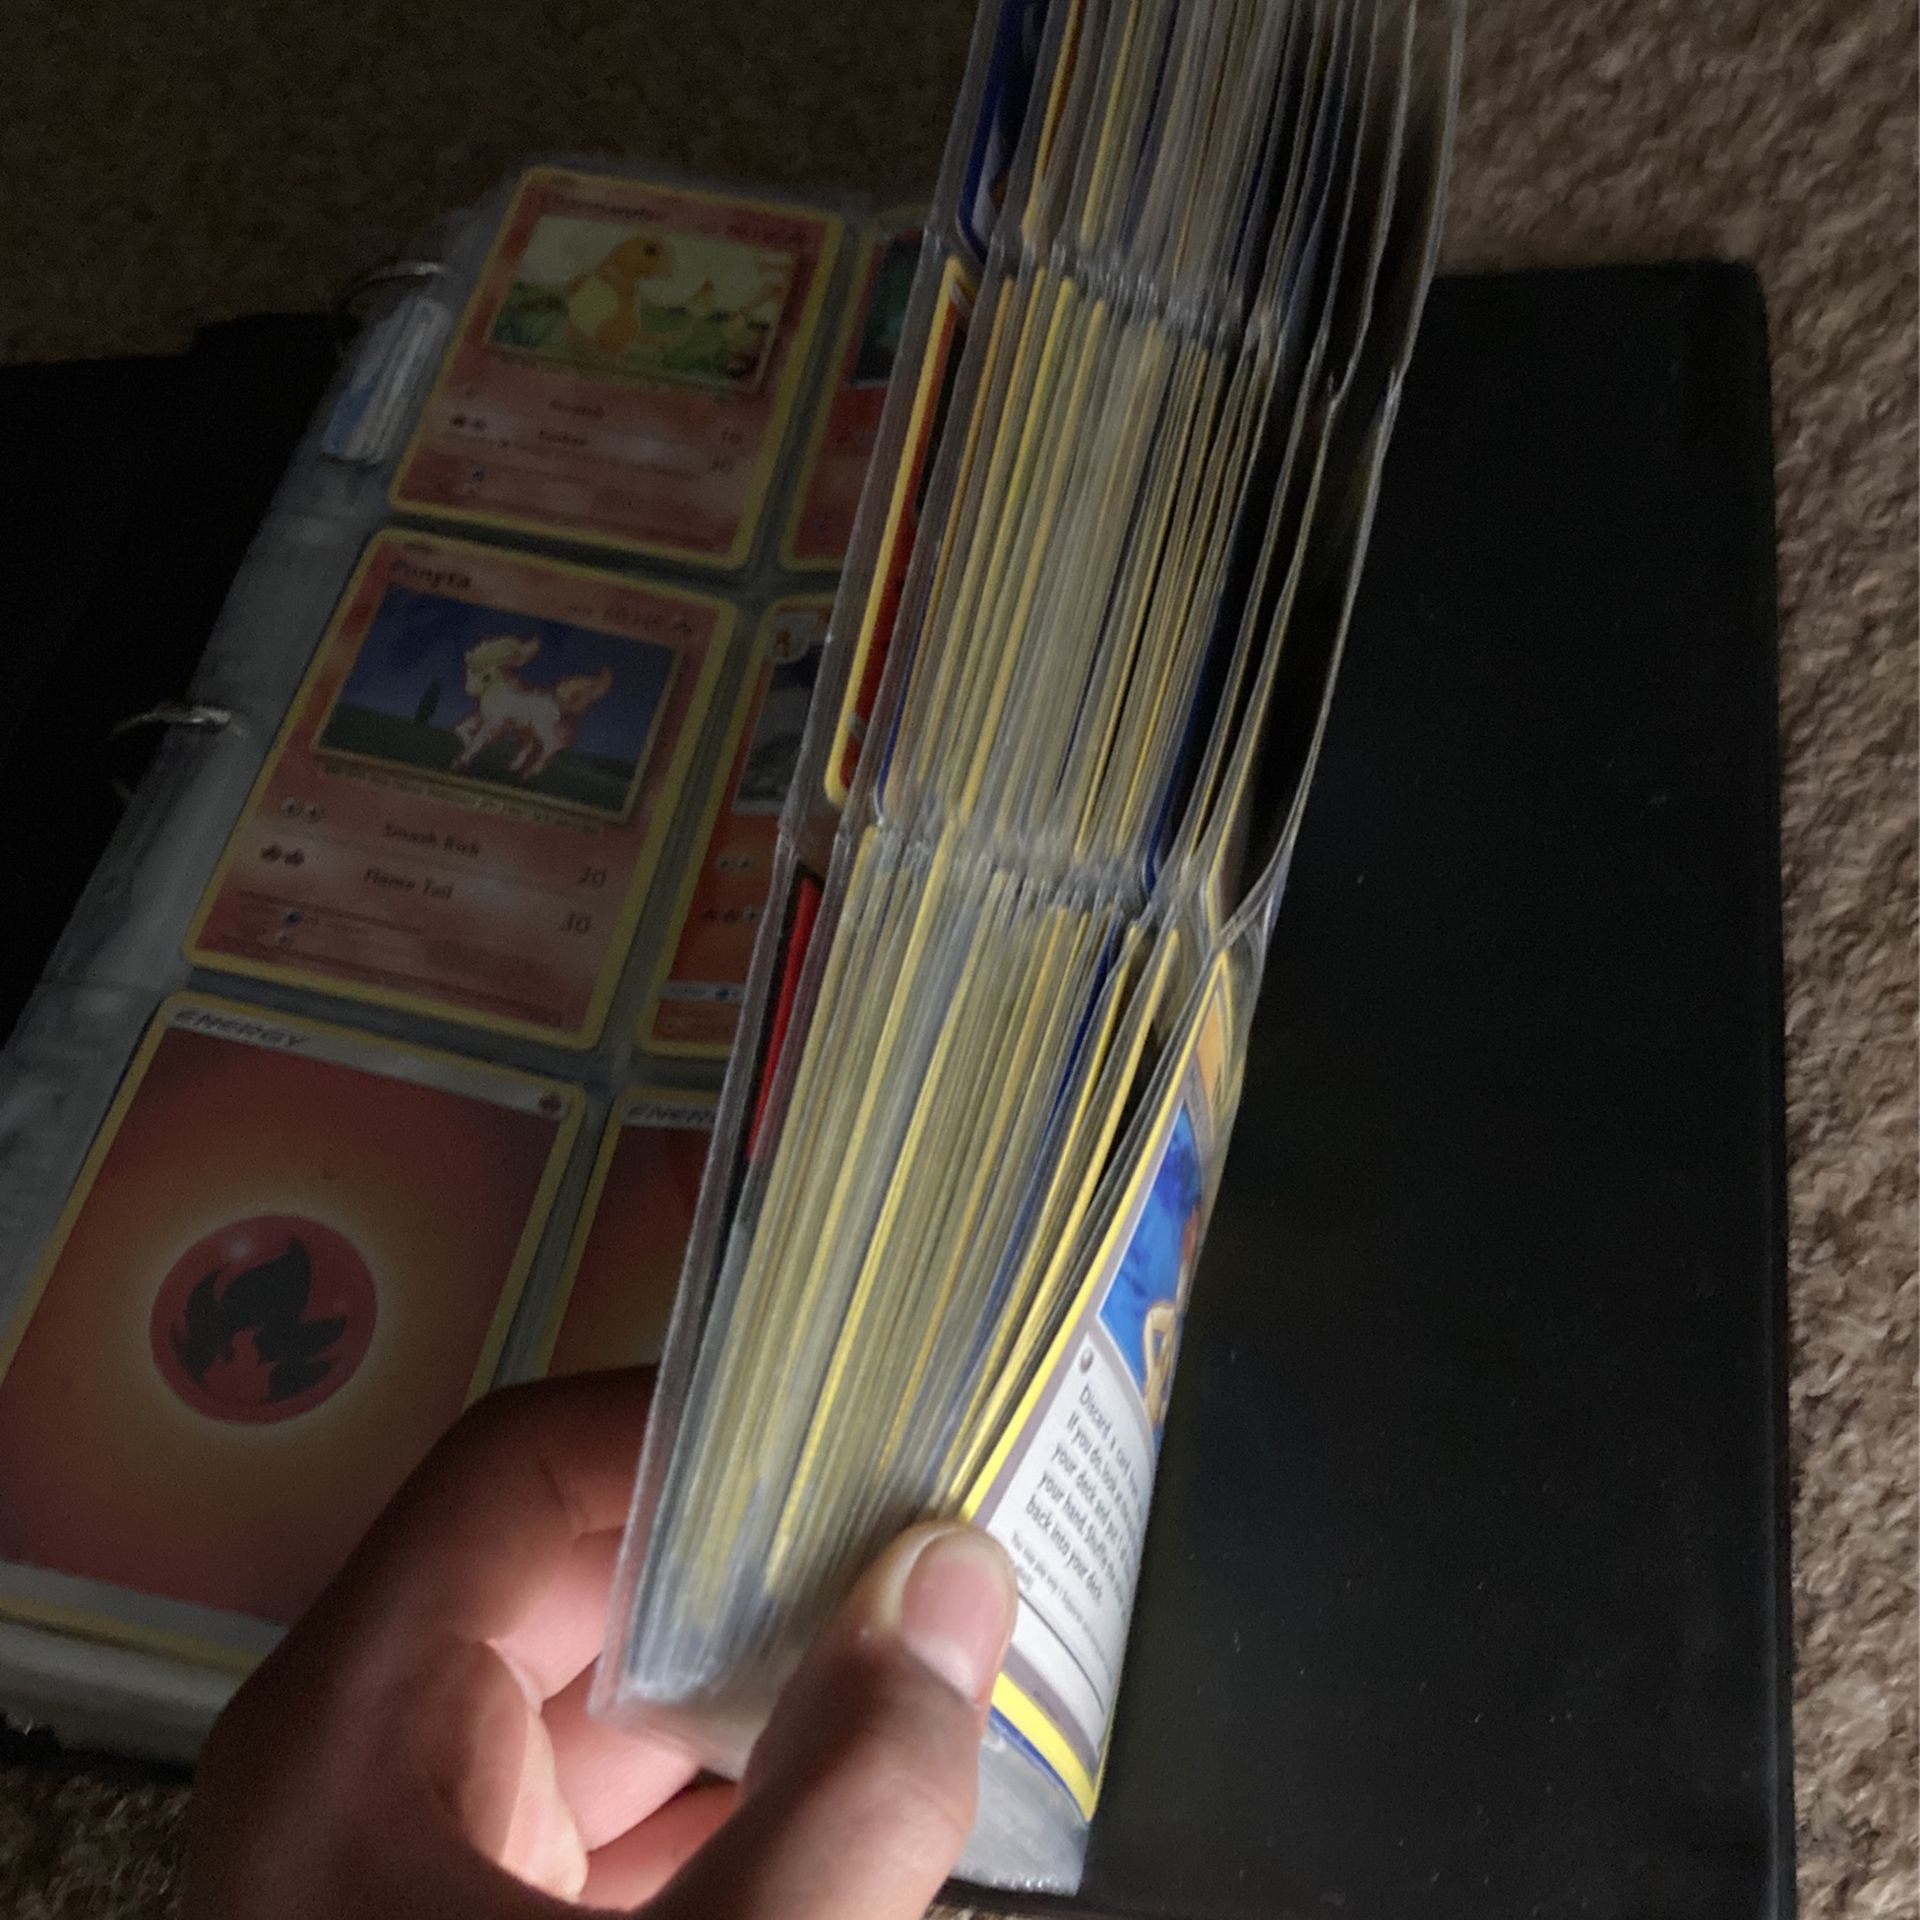 21 Pages Of Pokémon Card